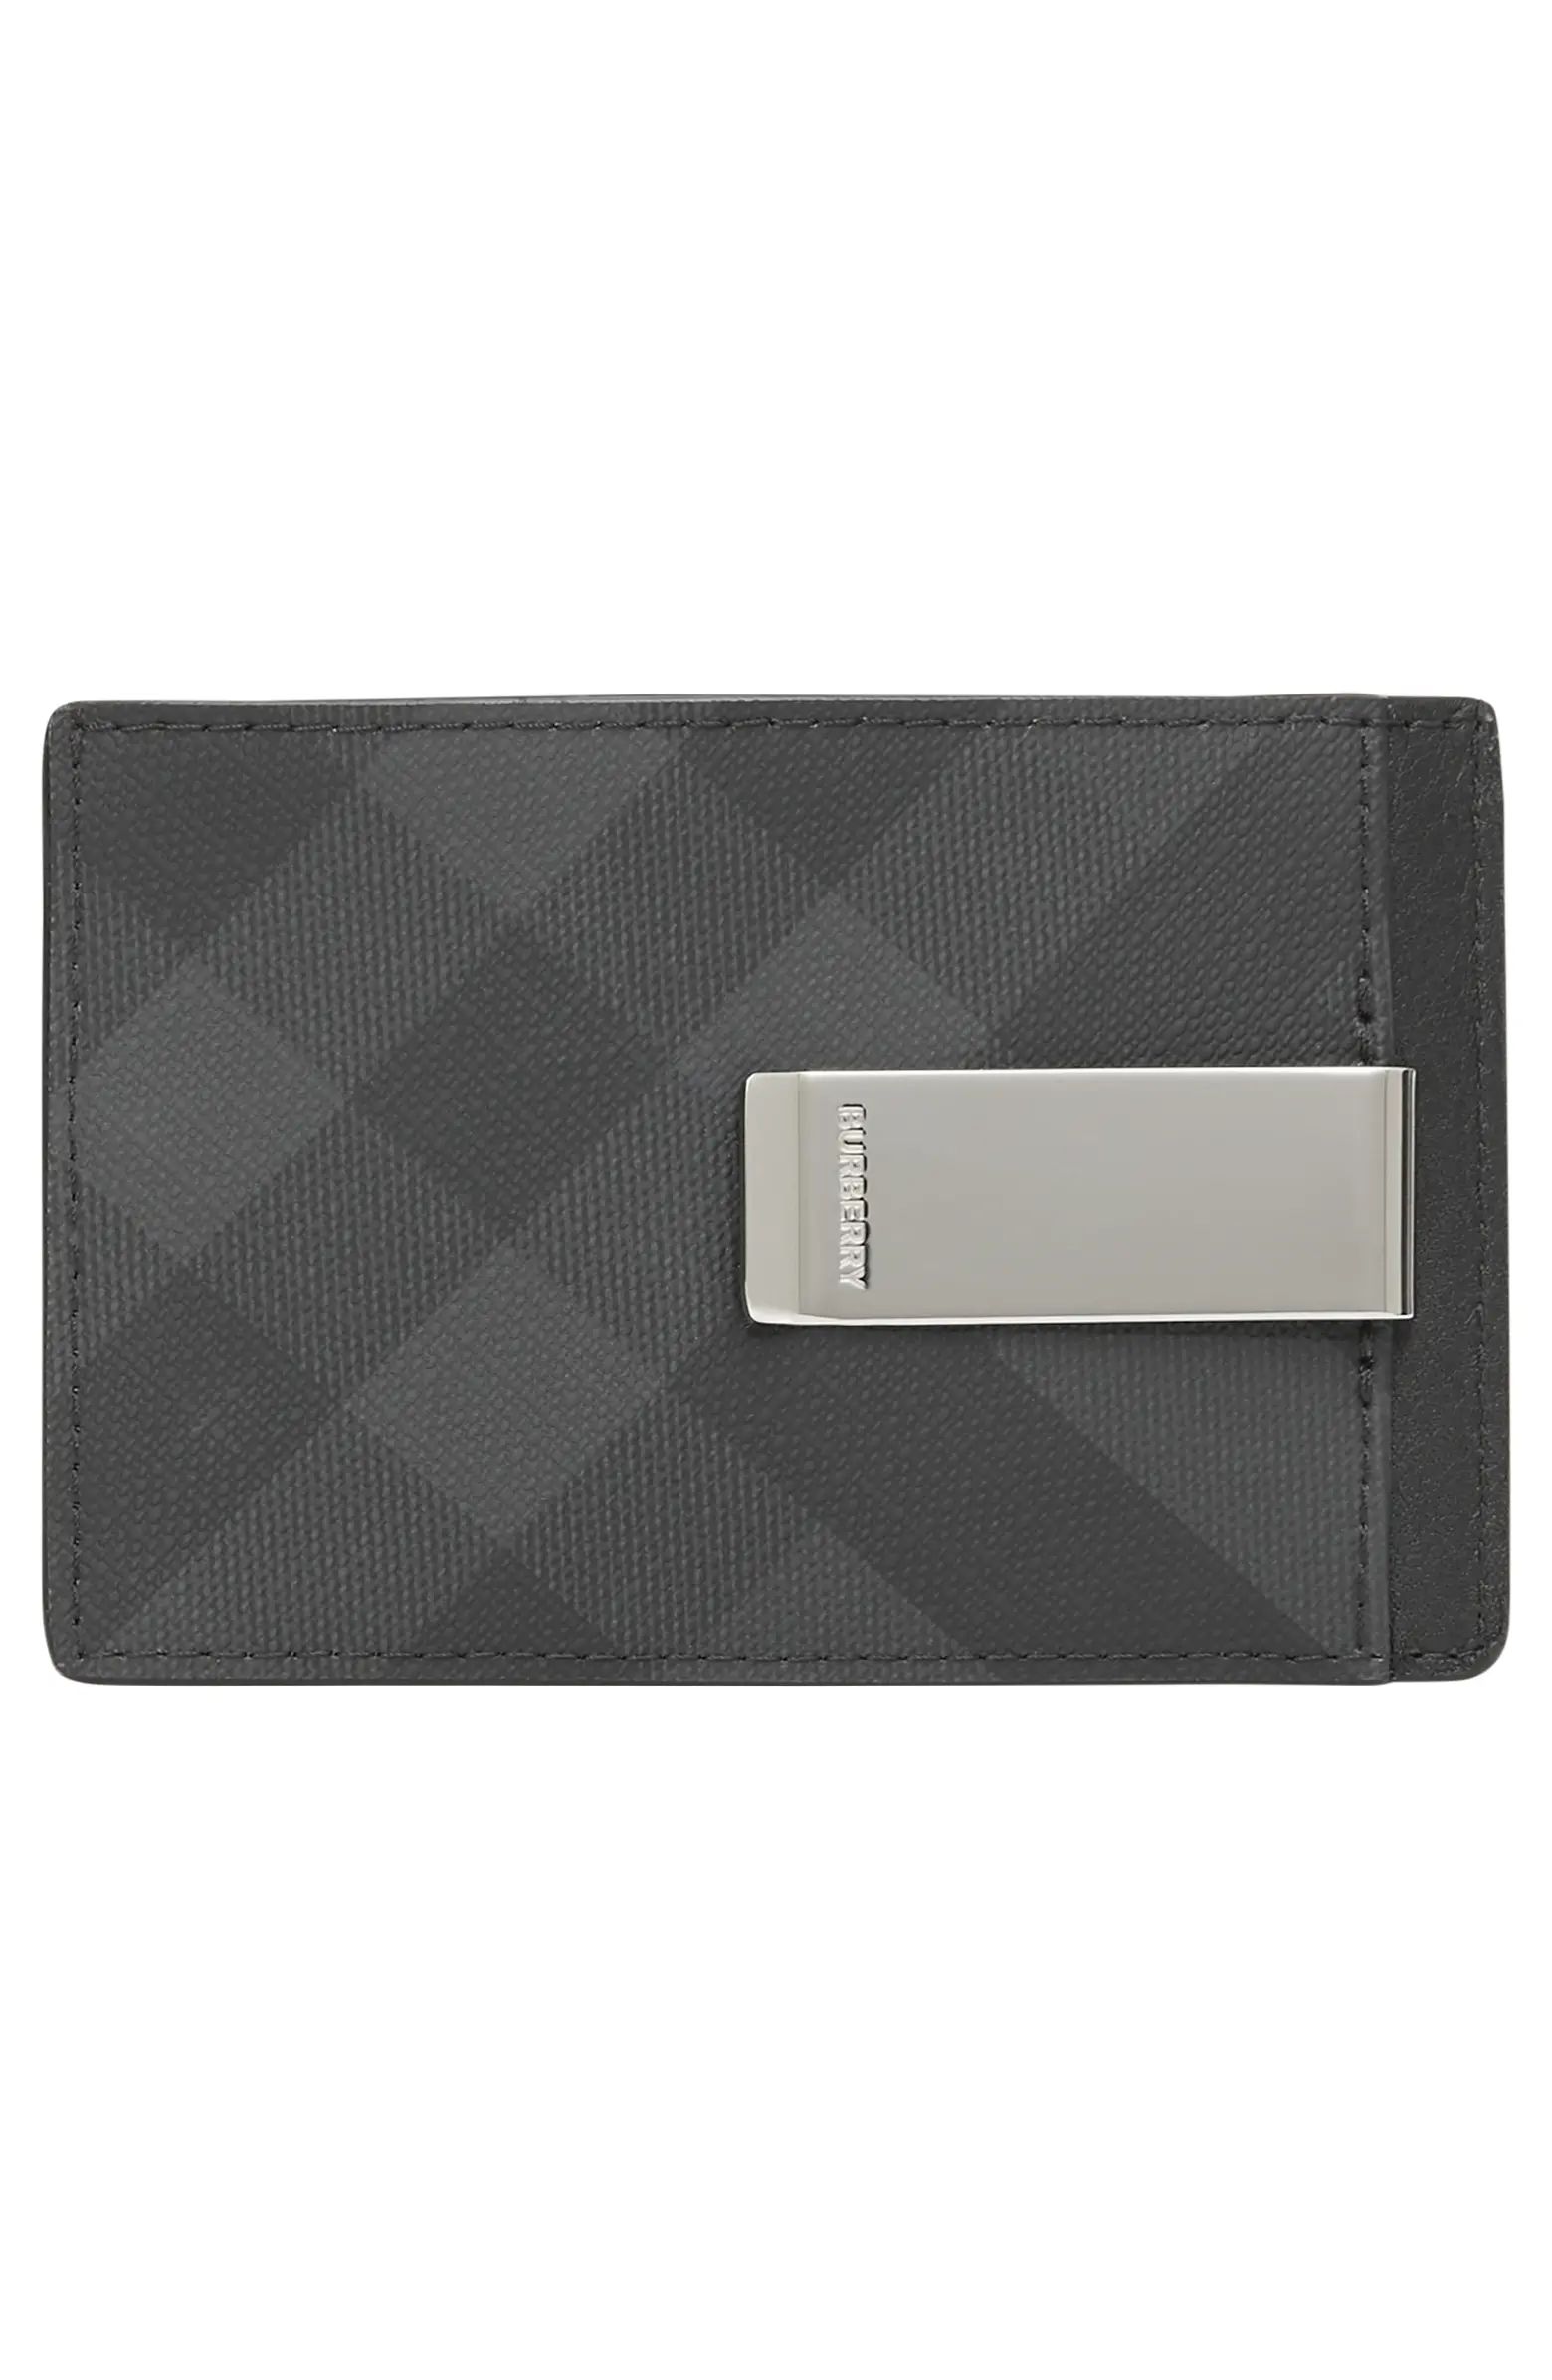 Chase London Check Card Case | Nordstrom